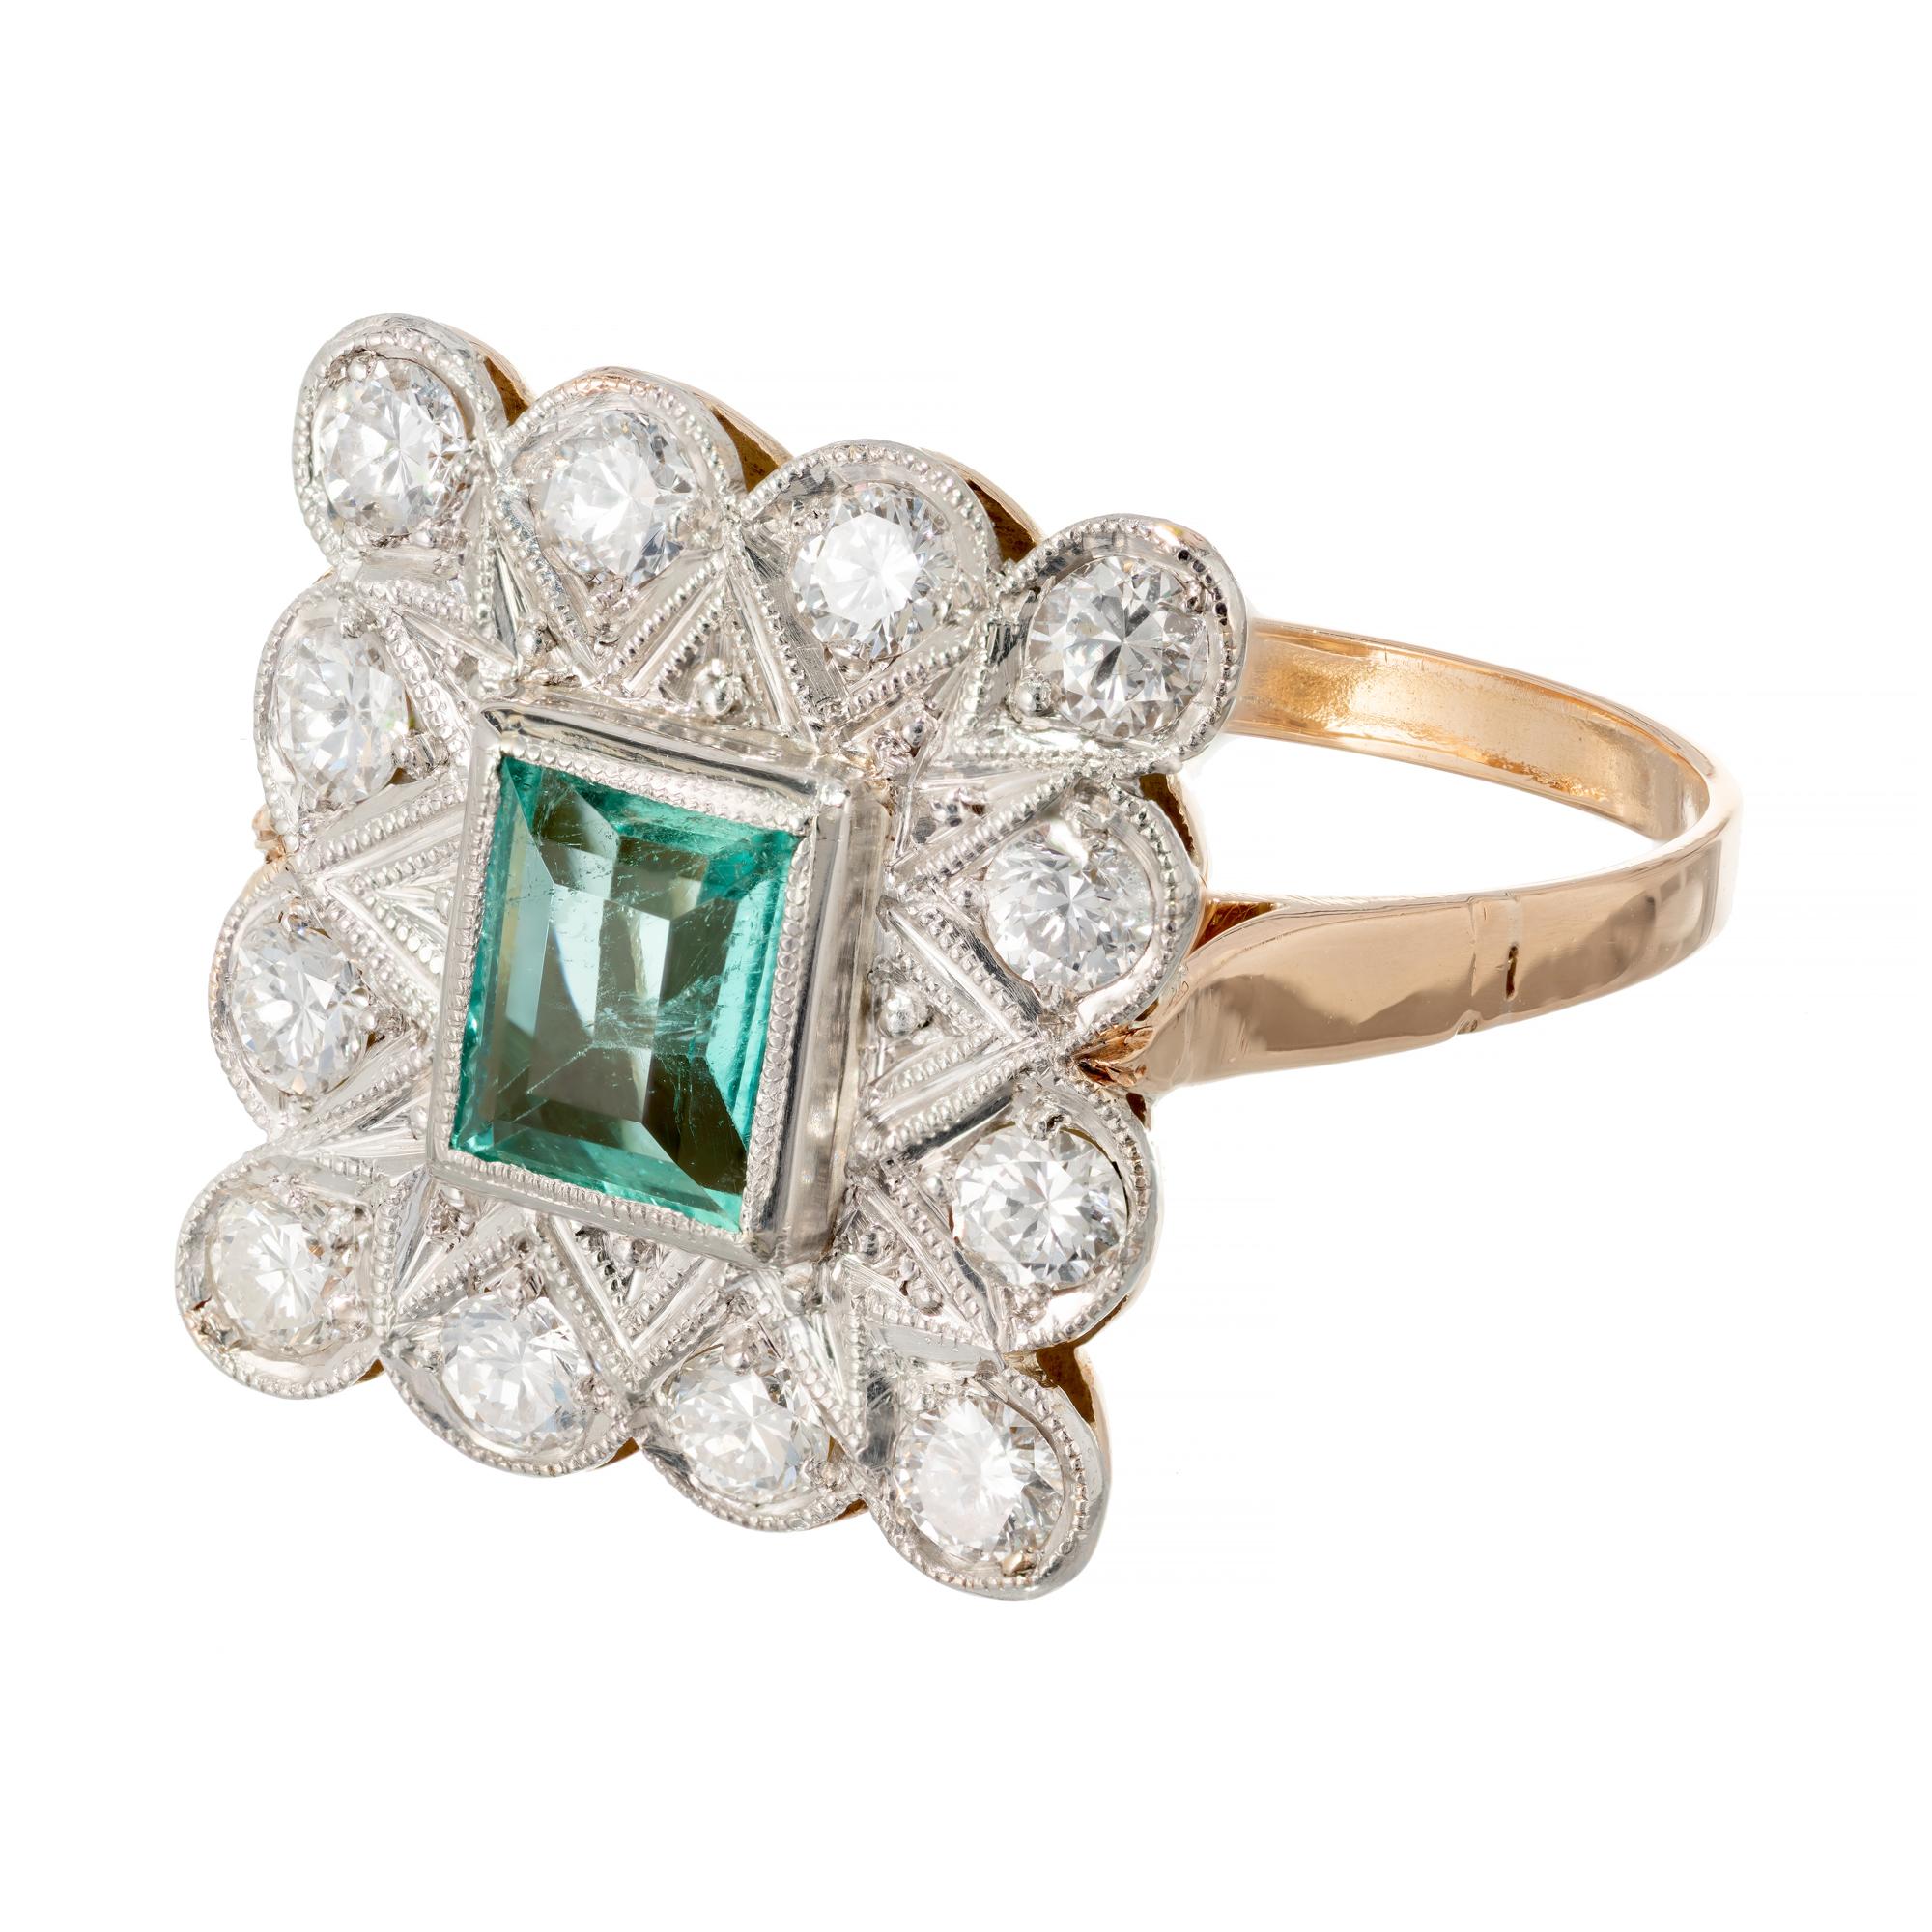 Art Deco Emerald diamond vintage ring. Octagonal center Emerald gemstone set in platinum and 14k rose gold. Handmade ring with a platinum top and a rose gold shank. 

1 octagonal cut green MI Emerald, Approximate .68ct GIA Certificate #